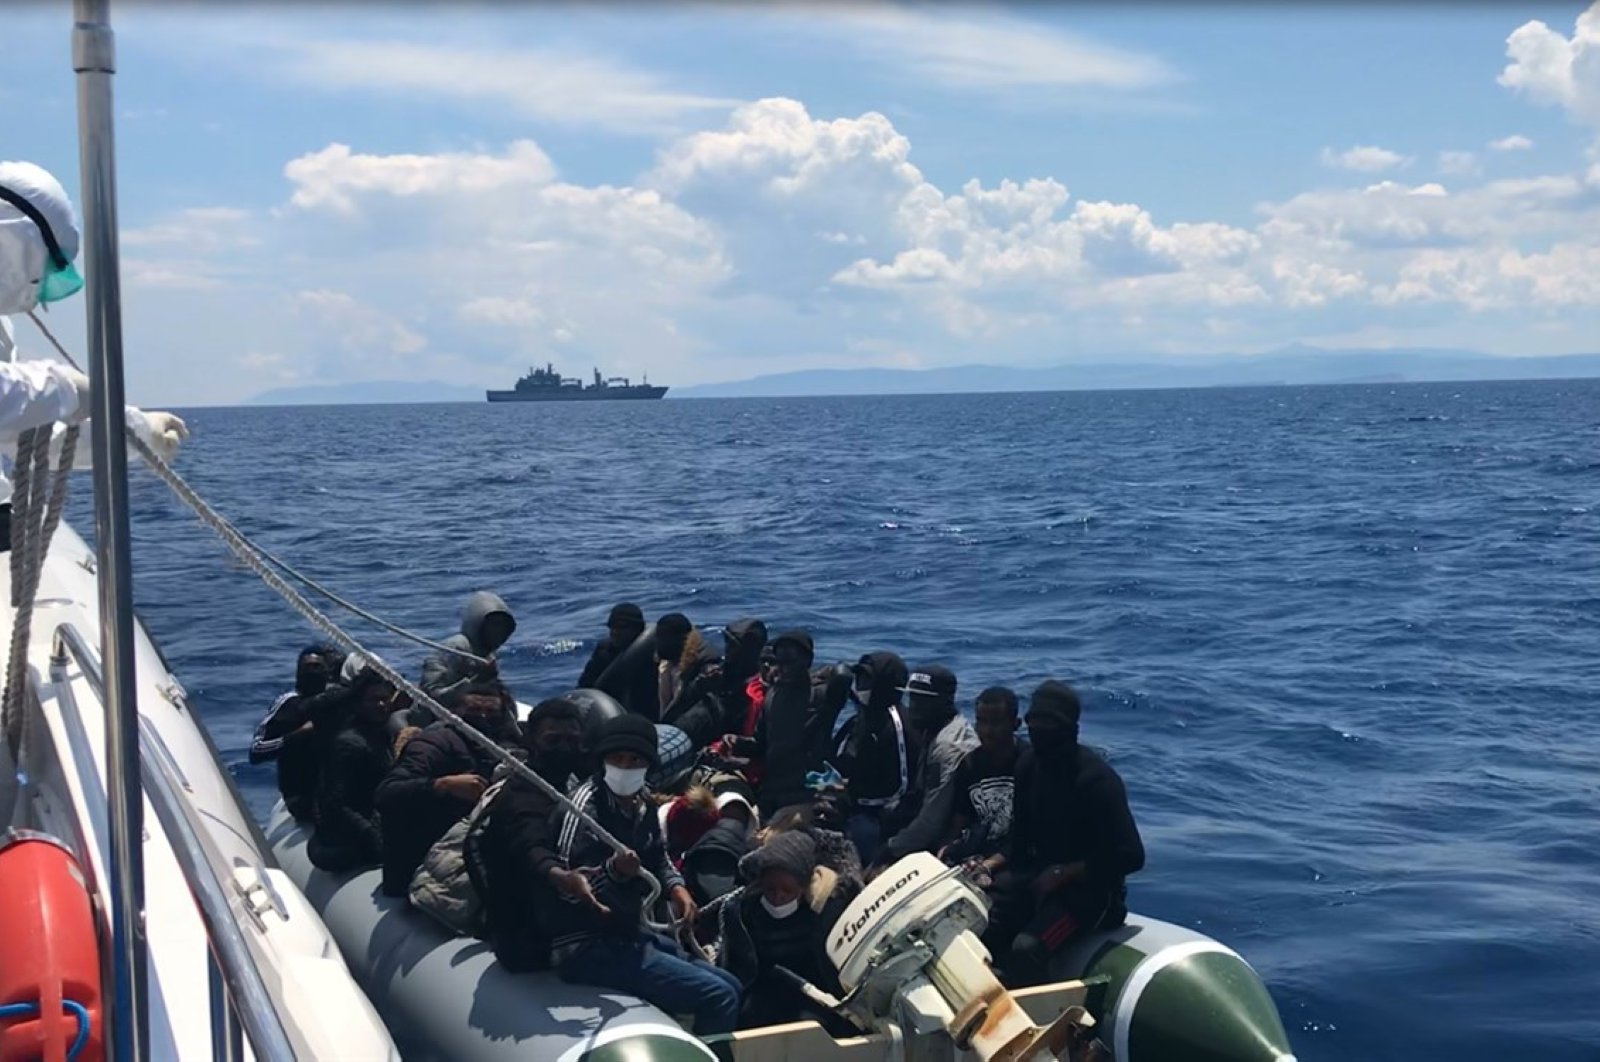 Turkish Coast Guard rescued 85 migrants and refugees who were pushed back by Greek forces into Turkish territorial waters, June 4, 2020. (AA Photo)

